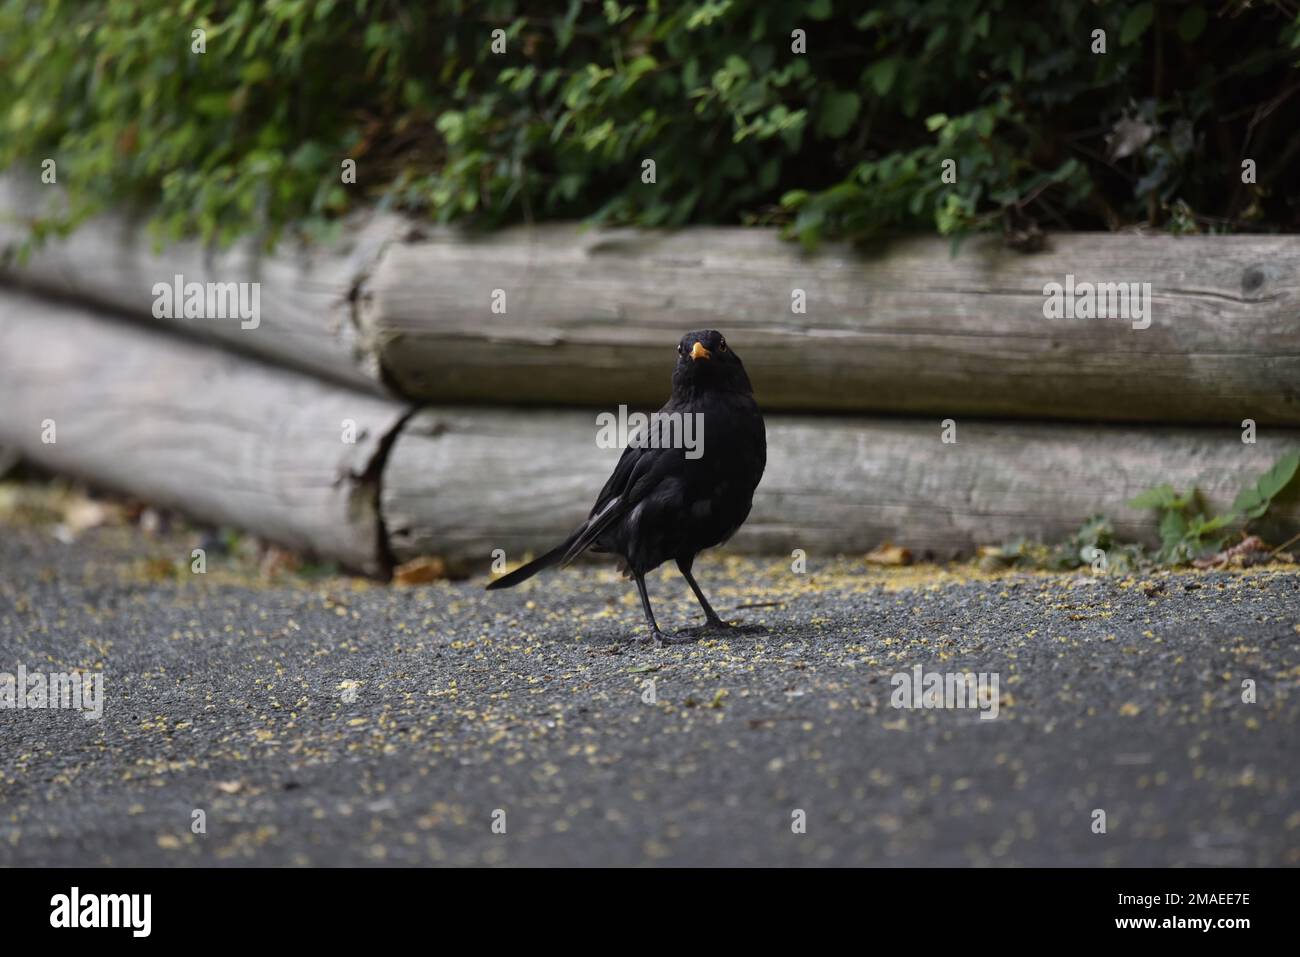 Male Common Blackbird (Turdus merula) Standing on Tarmac in Right-Profile with Head Facing Camera, Looking Inquisitive, on a Sunny Day in Wales, UK Stock Photo